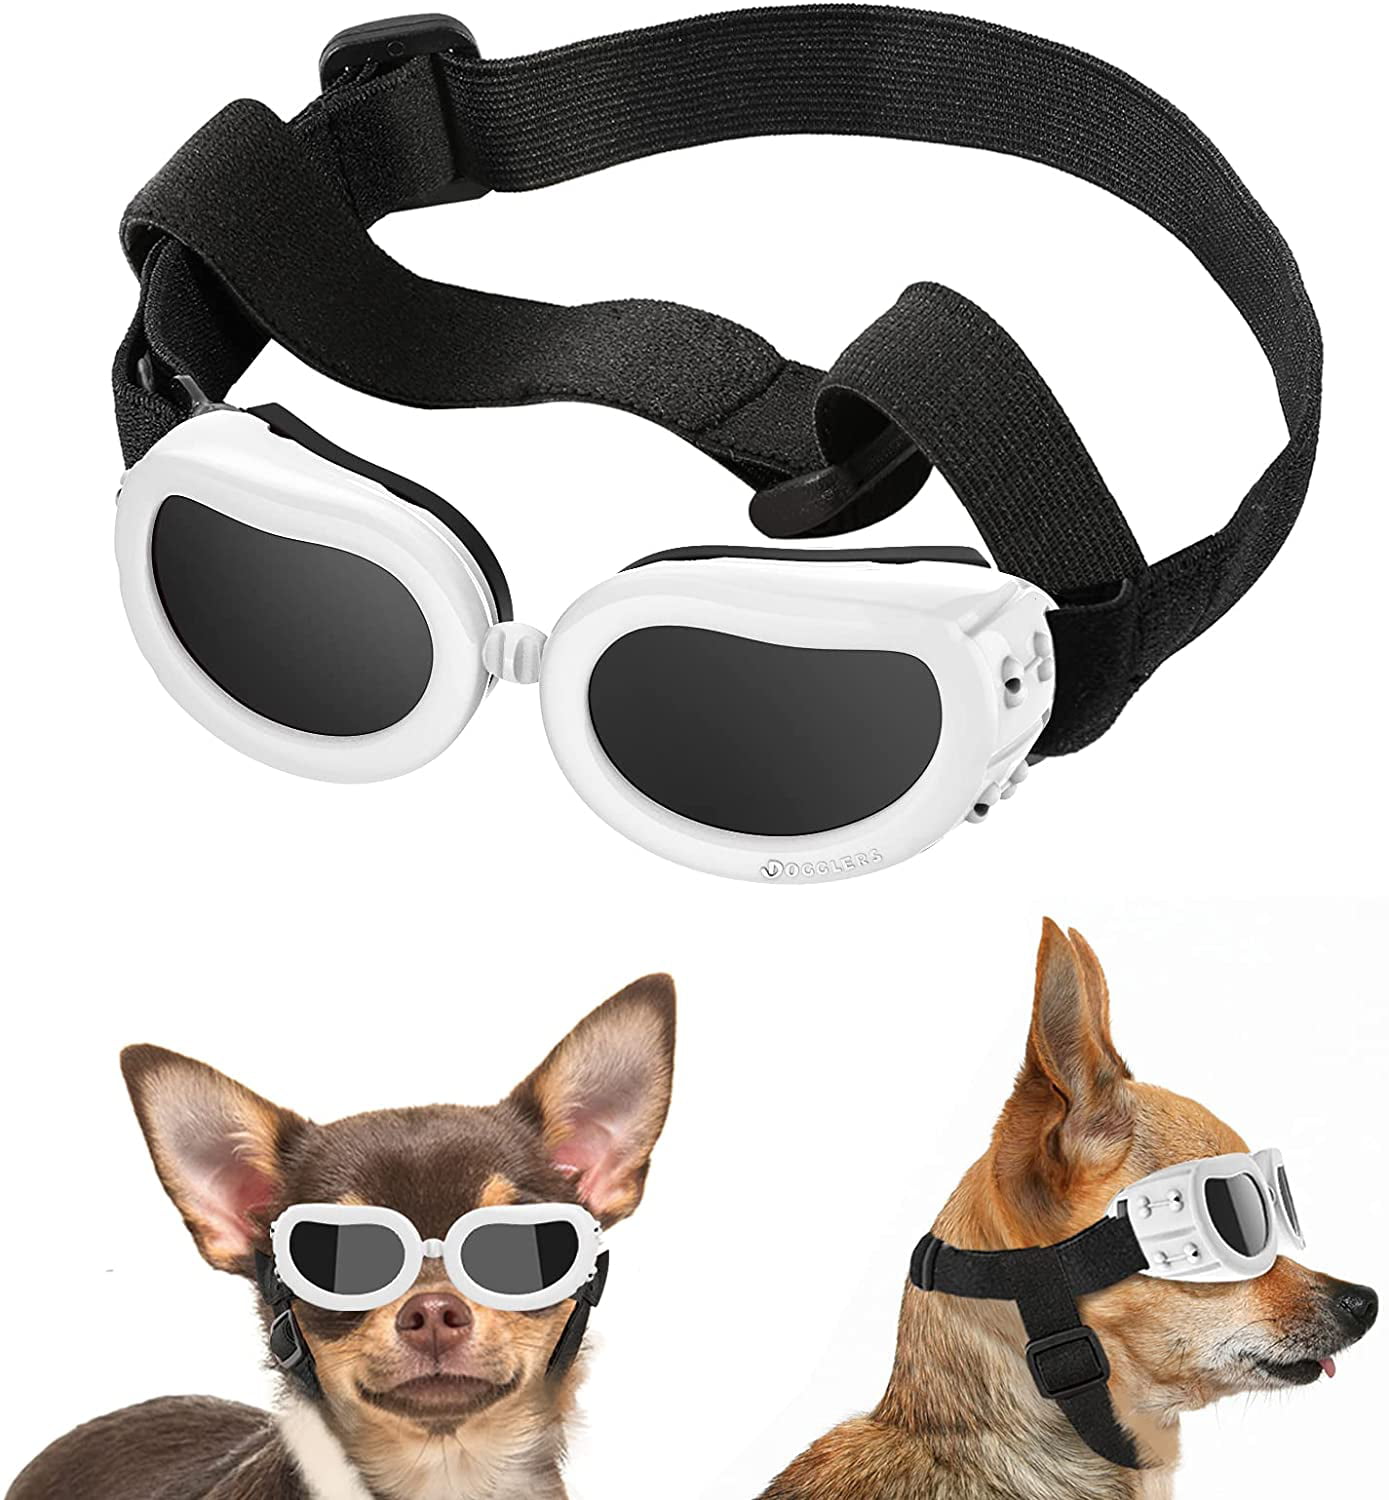 Outdoor Dog Sunglasses Anti-UV Eye Protection Goggles Waterproof Windproof Anti-Fog for Small Pet Puppy Dog Cat Black